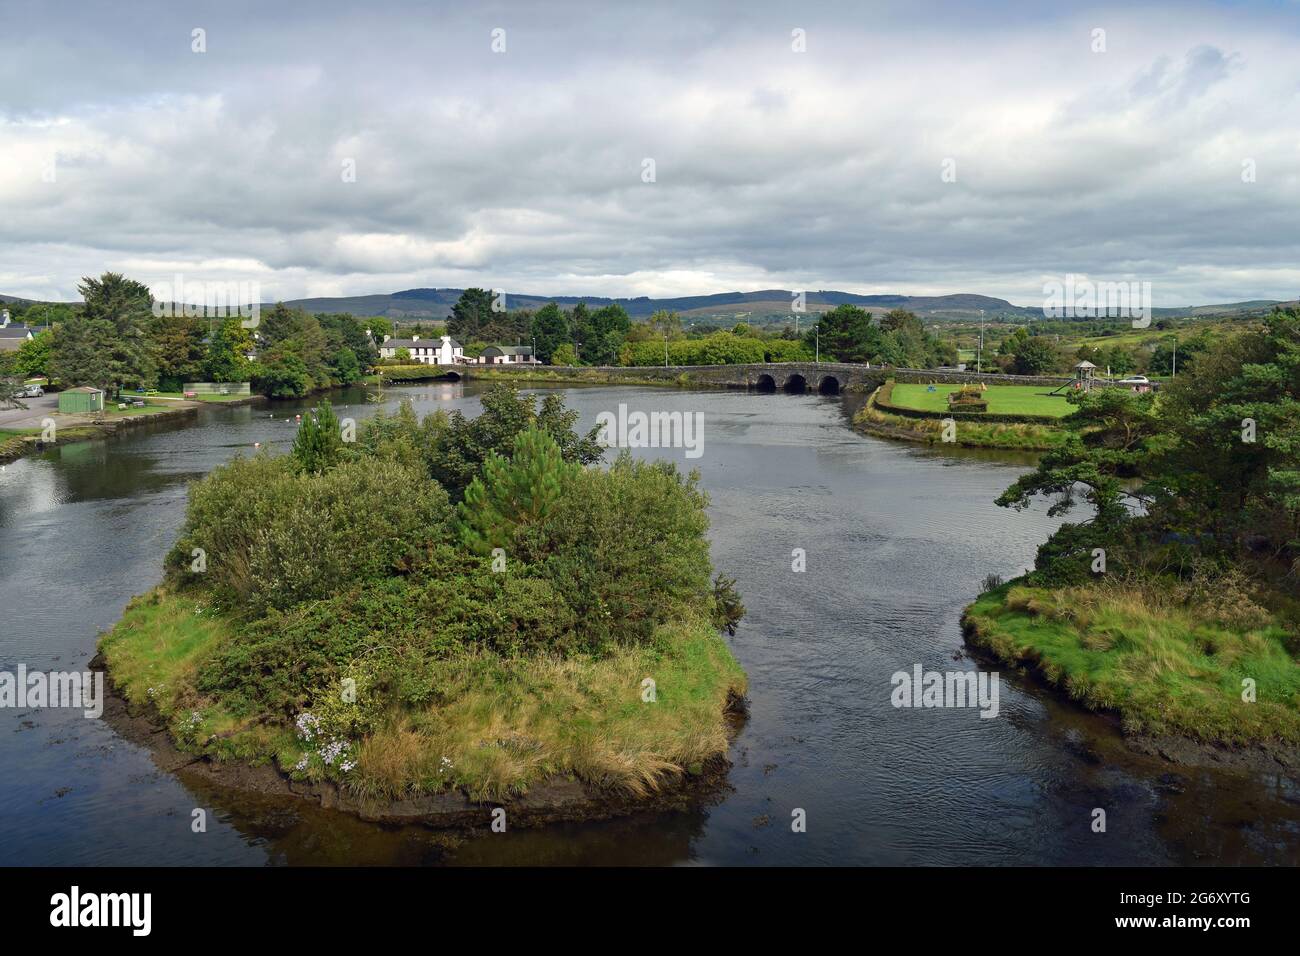 A view of Ballydehob village and tidal river, West Cork, Ireland. Stock Photo